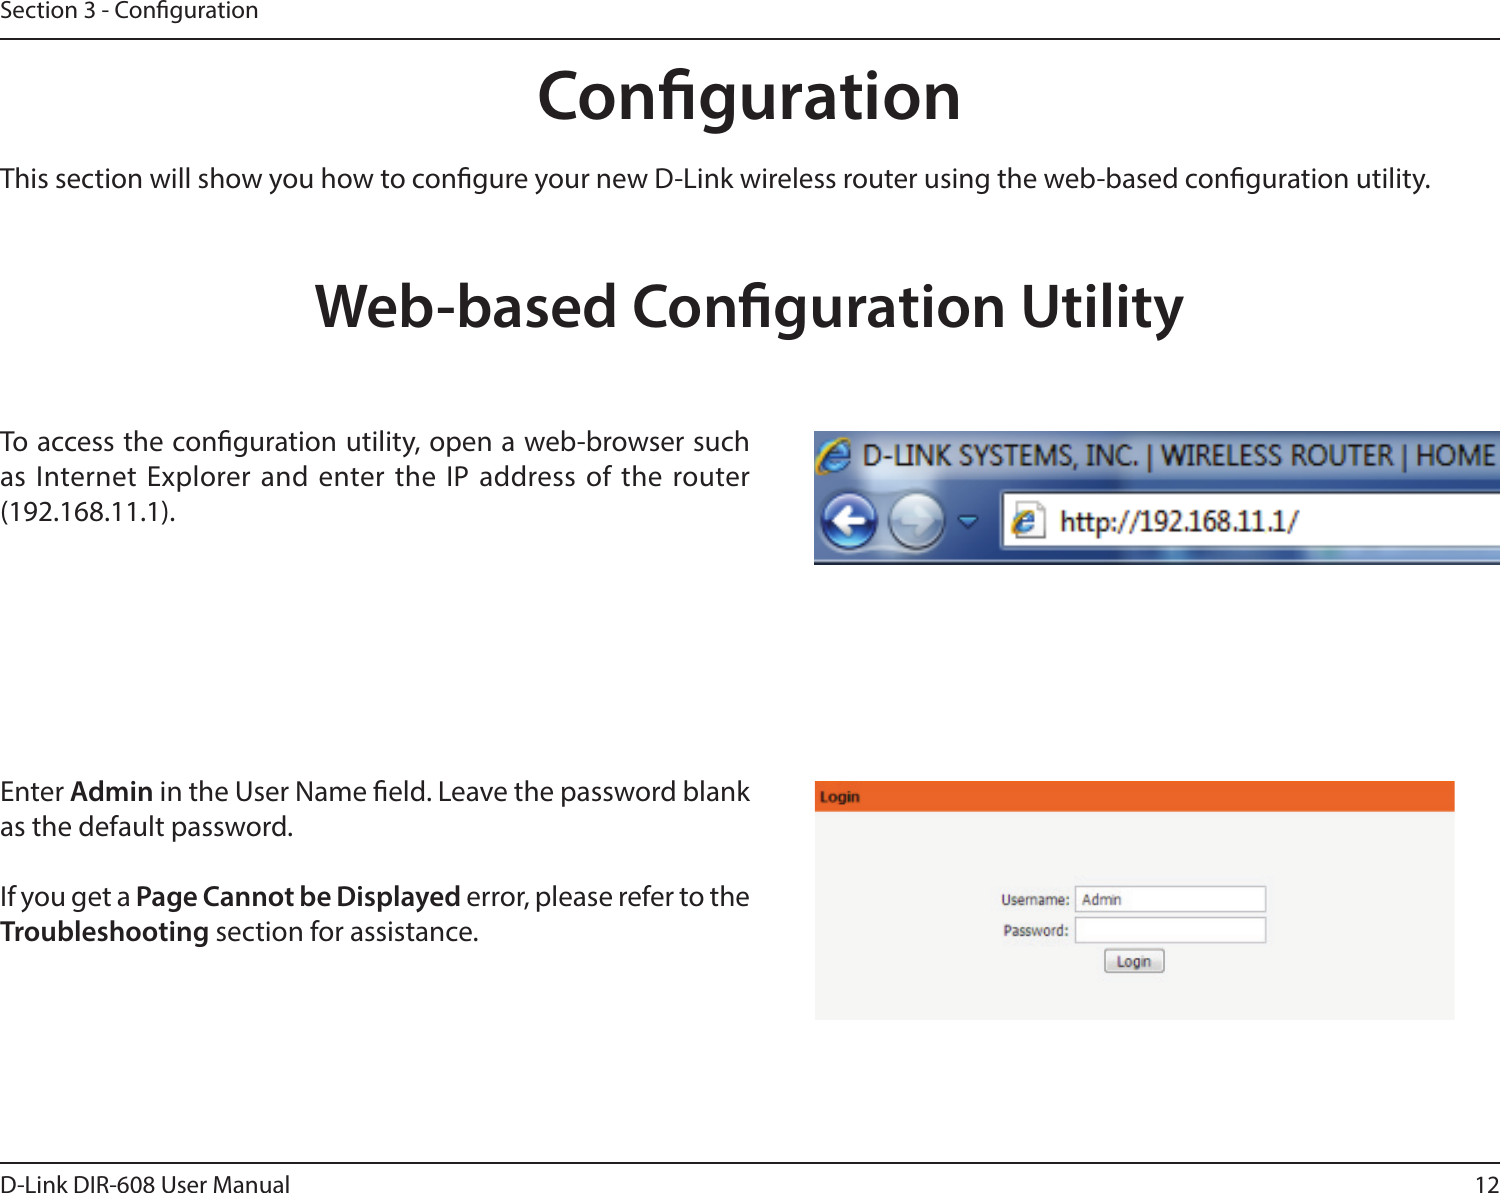 12D-Link DIR-608 User ManualSection 3 - CongurationCongurationThis section will show you how to congure your new D-Link wireless router using the web-based conguration utility.Web-based Conguration UtilityTo access the conguration utility, open a web-browser such as Internet Explorer and enter the IP address of the router (192.168.11.1).Enter Admin in the User Name eld. Leave the password blank as the default password. If you get a Page Cannot be Displayed error, please refer to the Troubleshooting section for assistance.